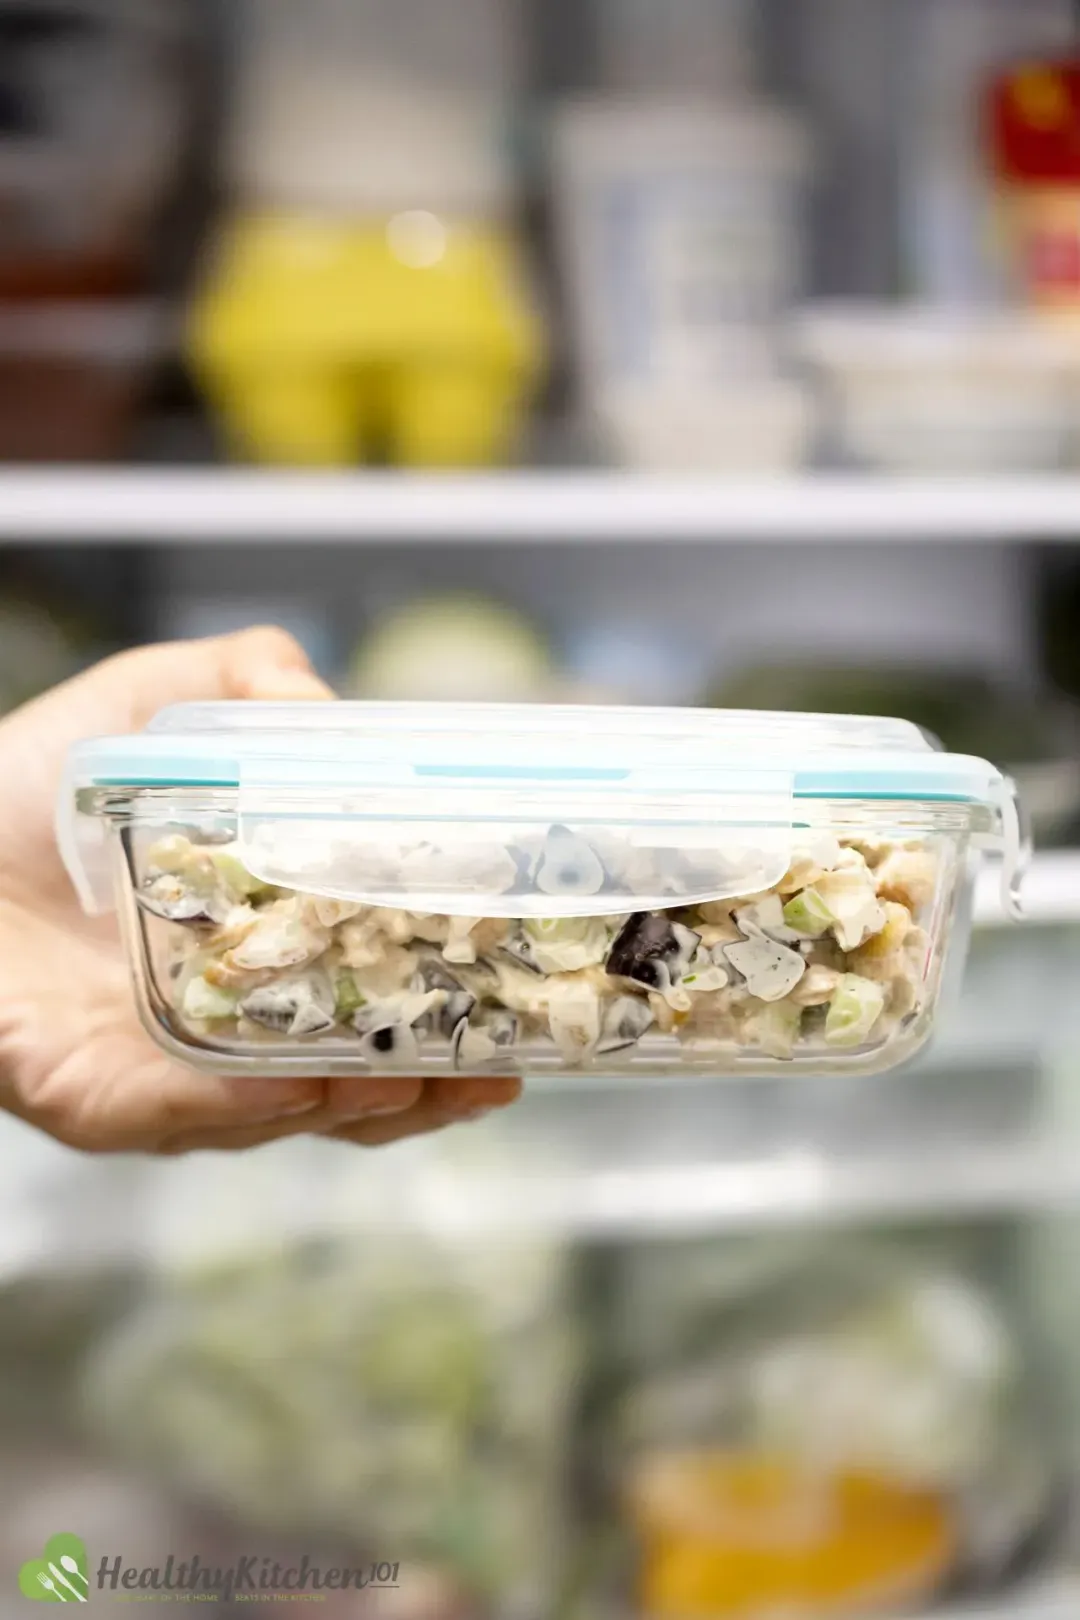 A hand holding a closed container of chicken and grape salad in front of an open fridge